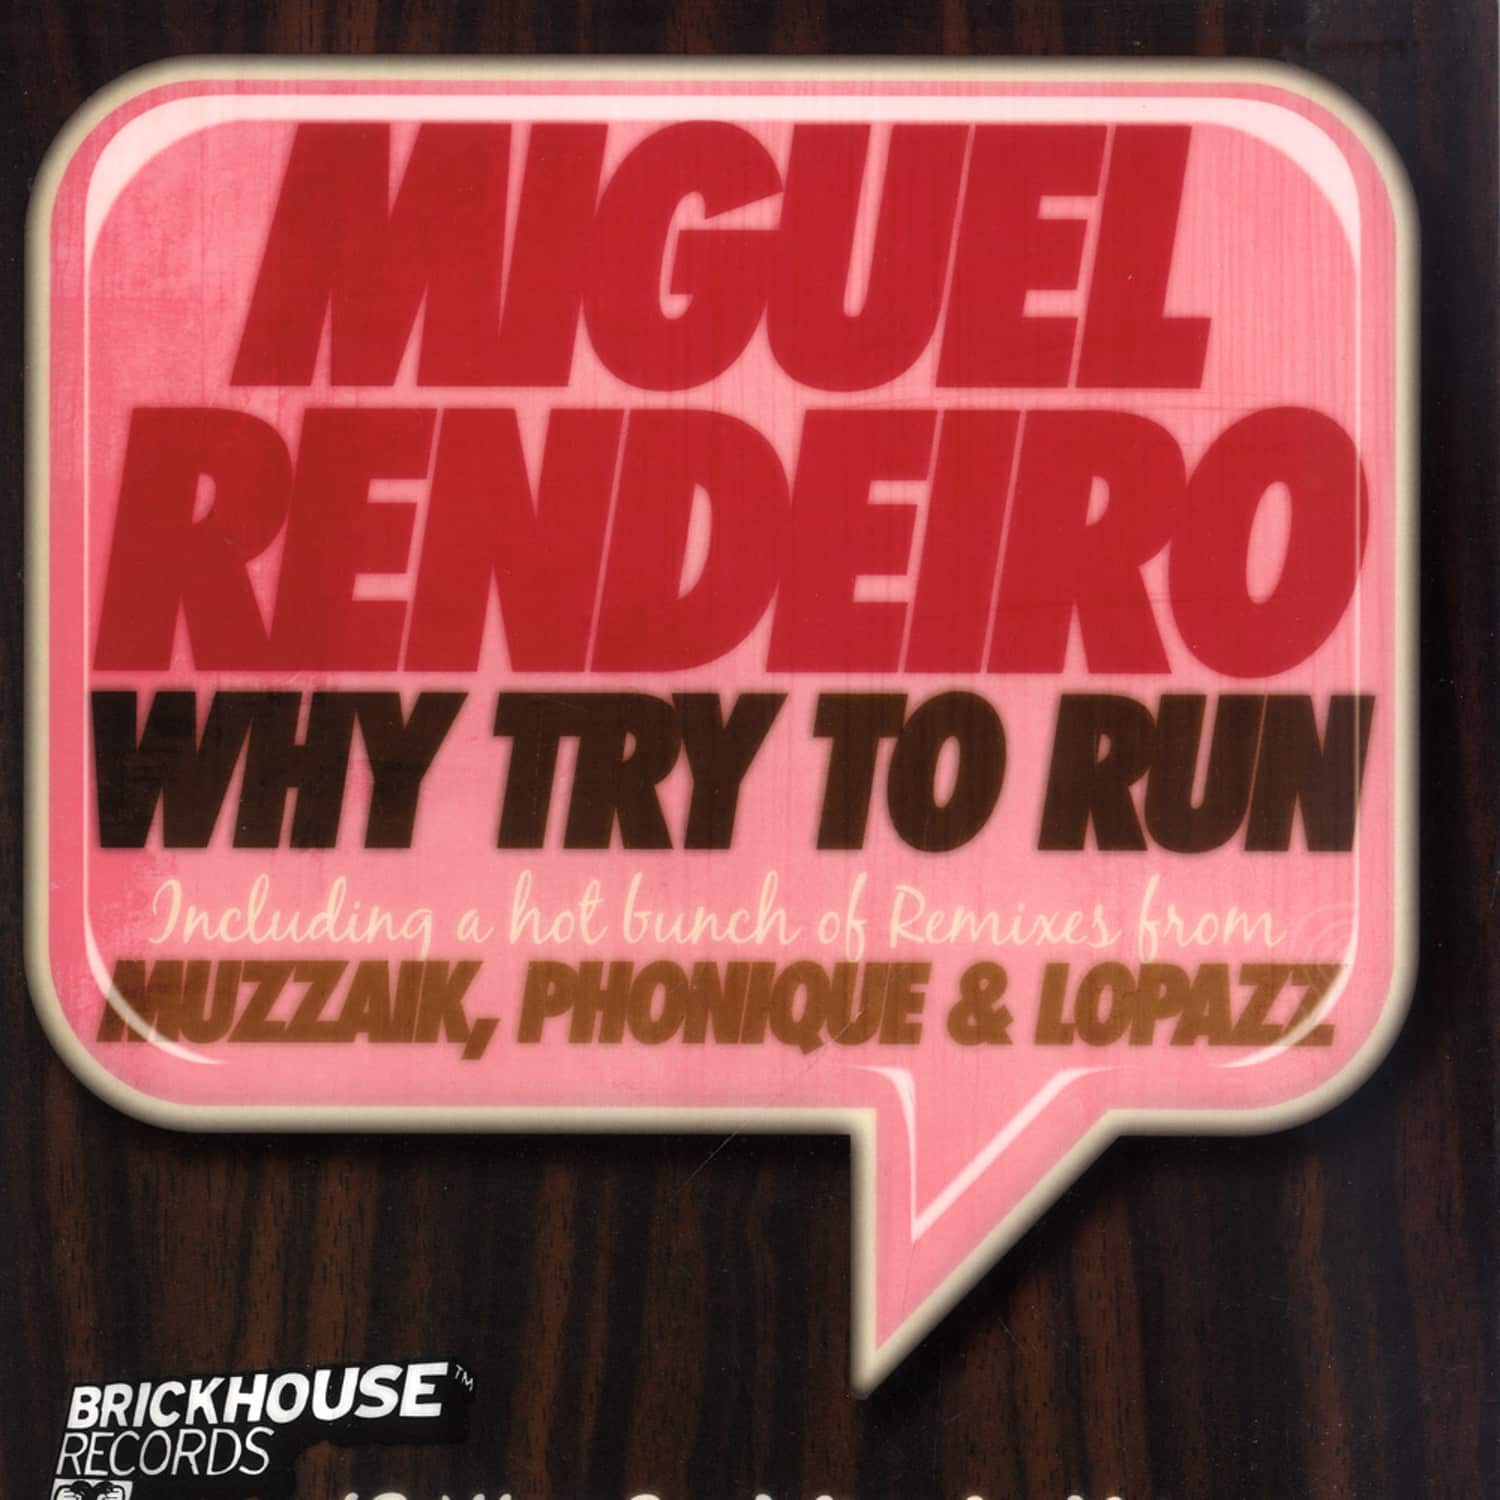 Miguel Rendeiro - WHY TRY TO RUN